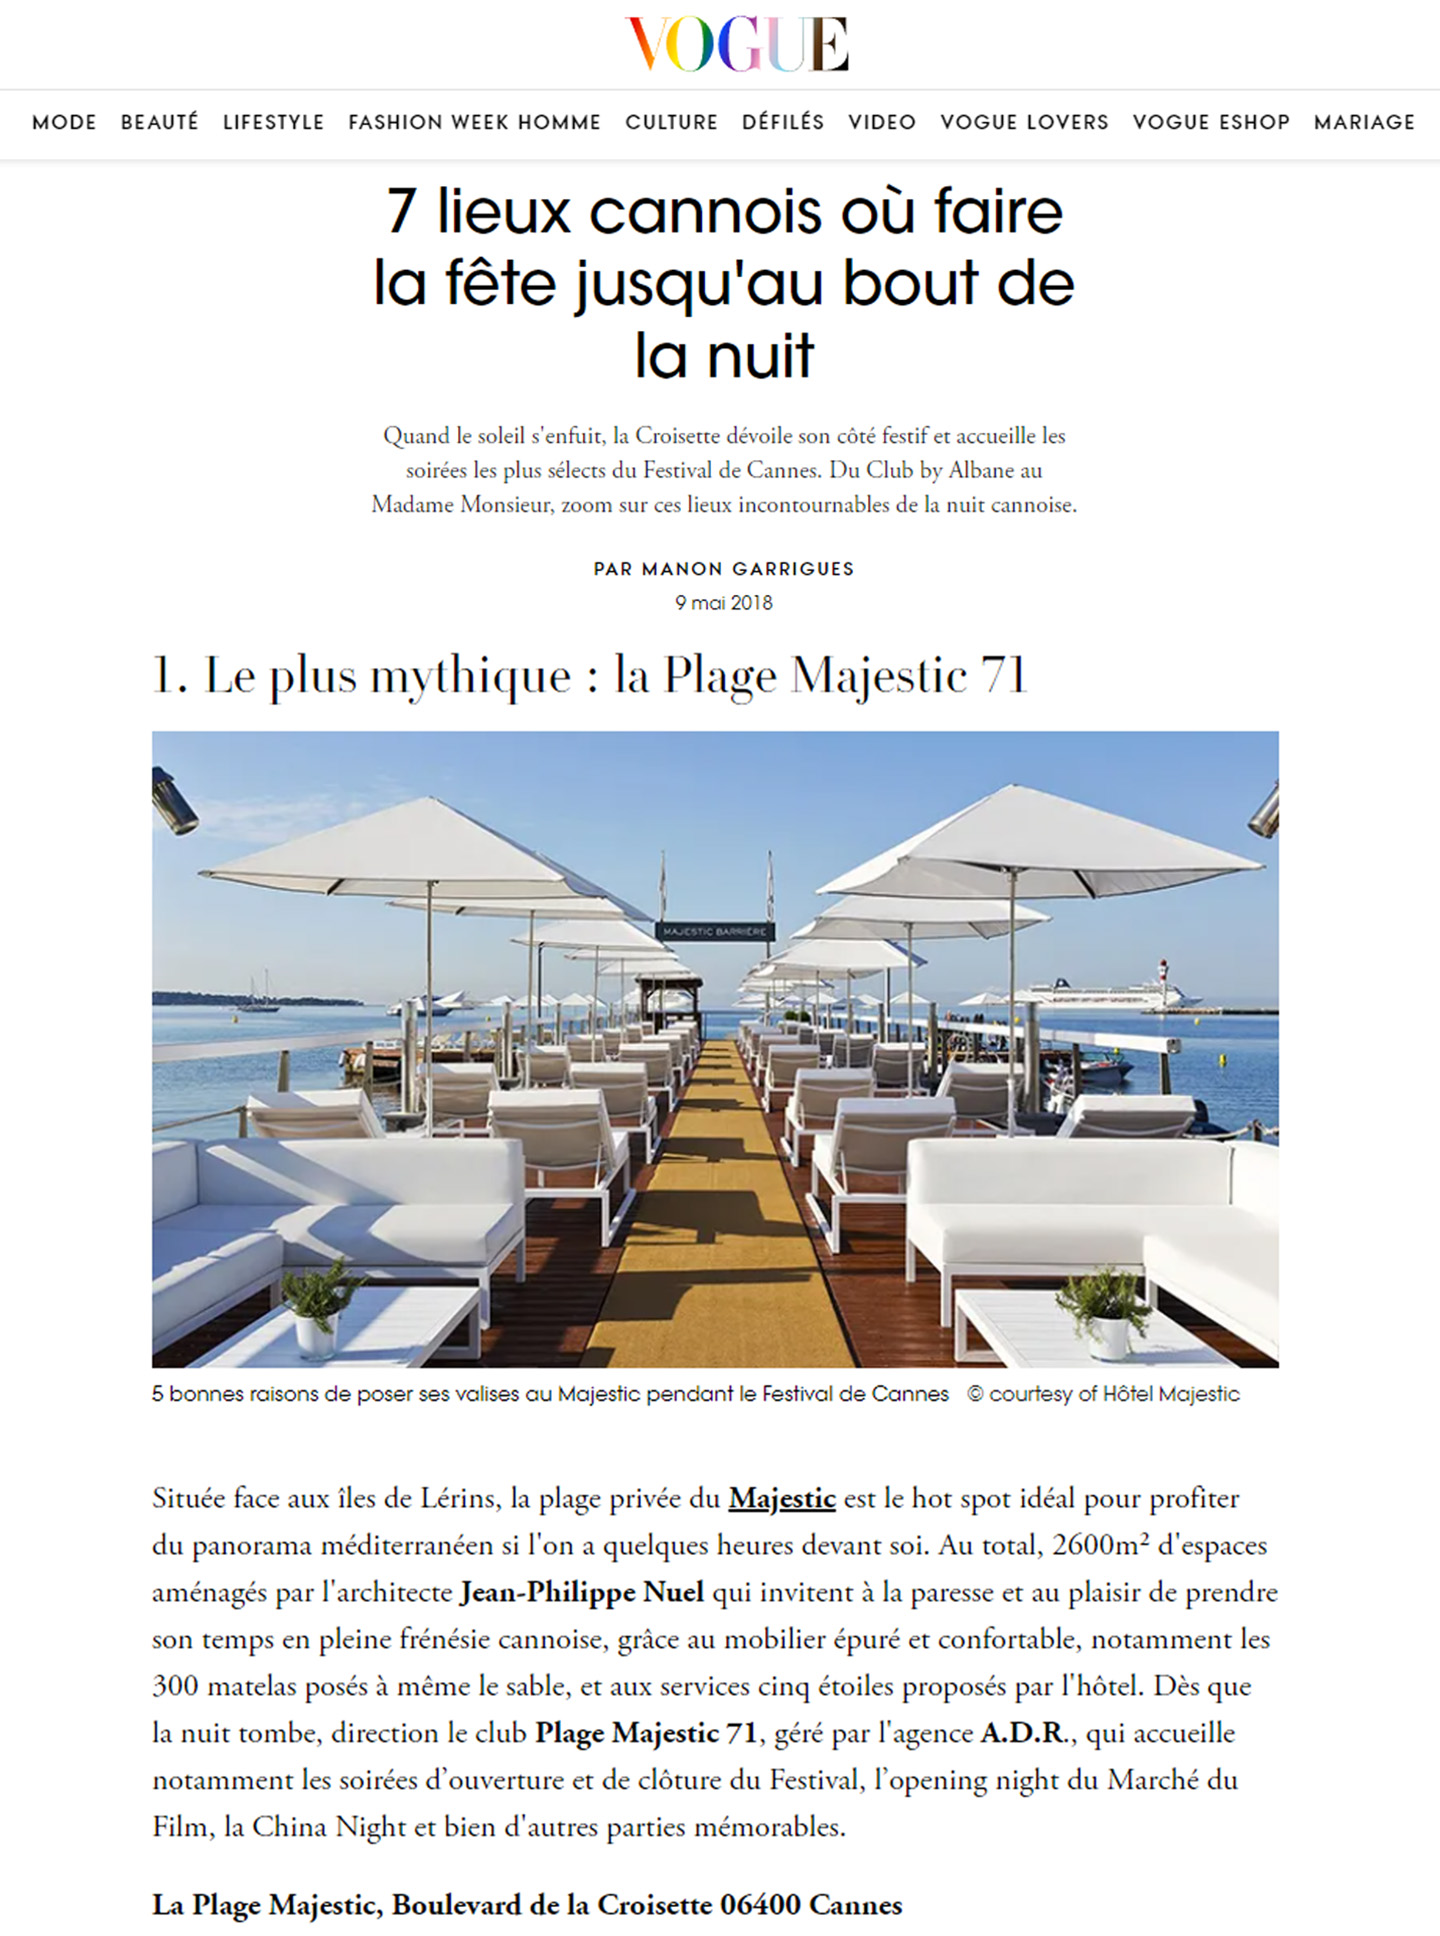 article on the restaurant la plage majestic barrière in cannes realized by the interior design studio jean-philippe nuel